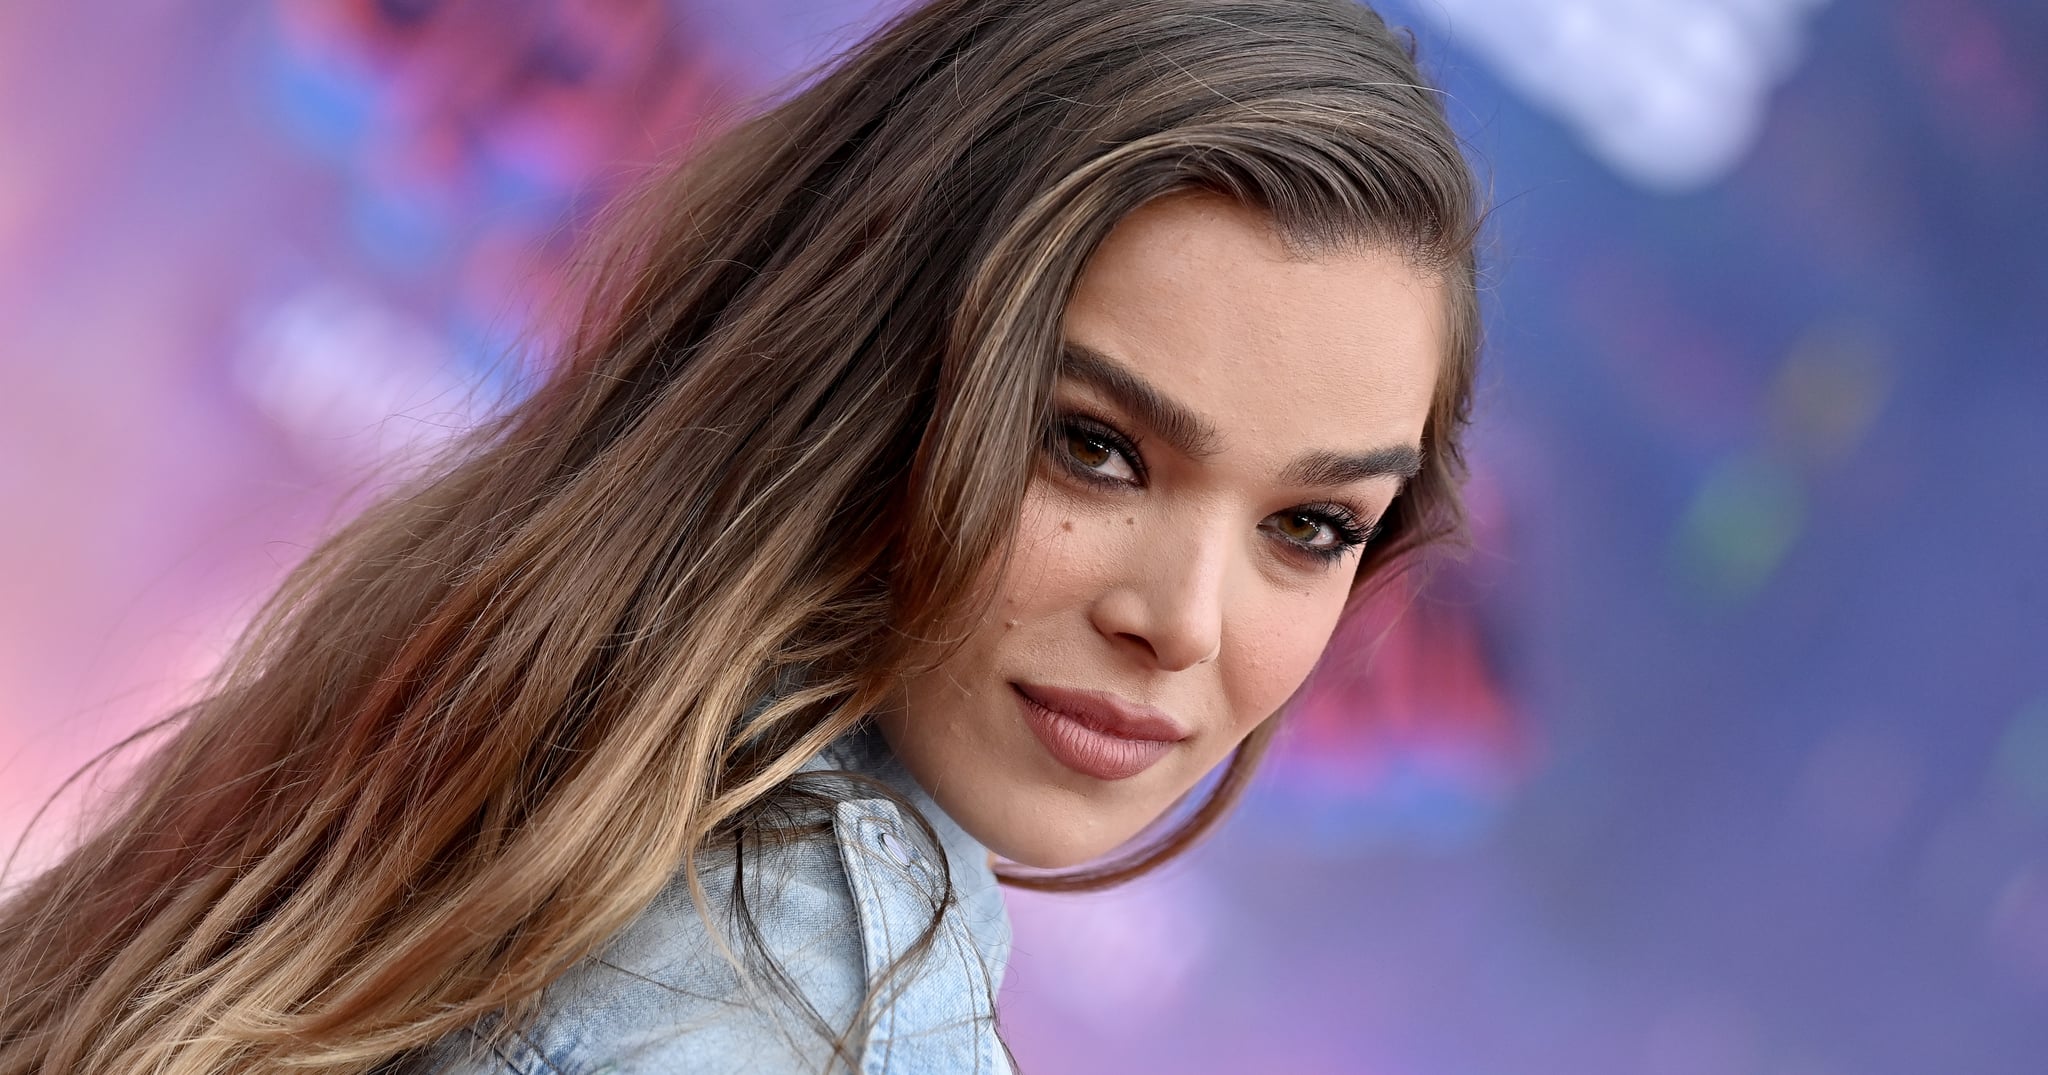 Hailee Steinfeld Shows Some Leg in an Extreme Slit Skirt at the 